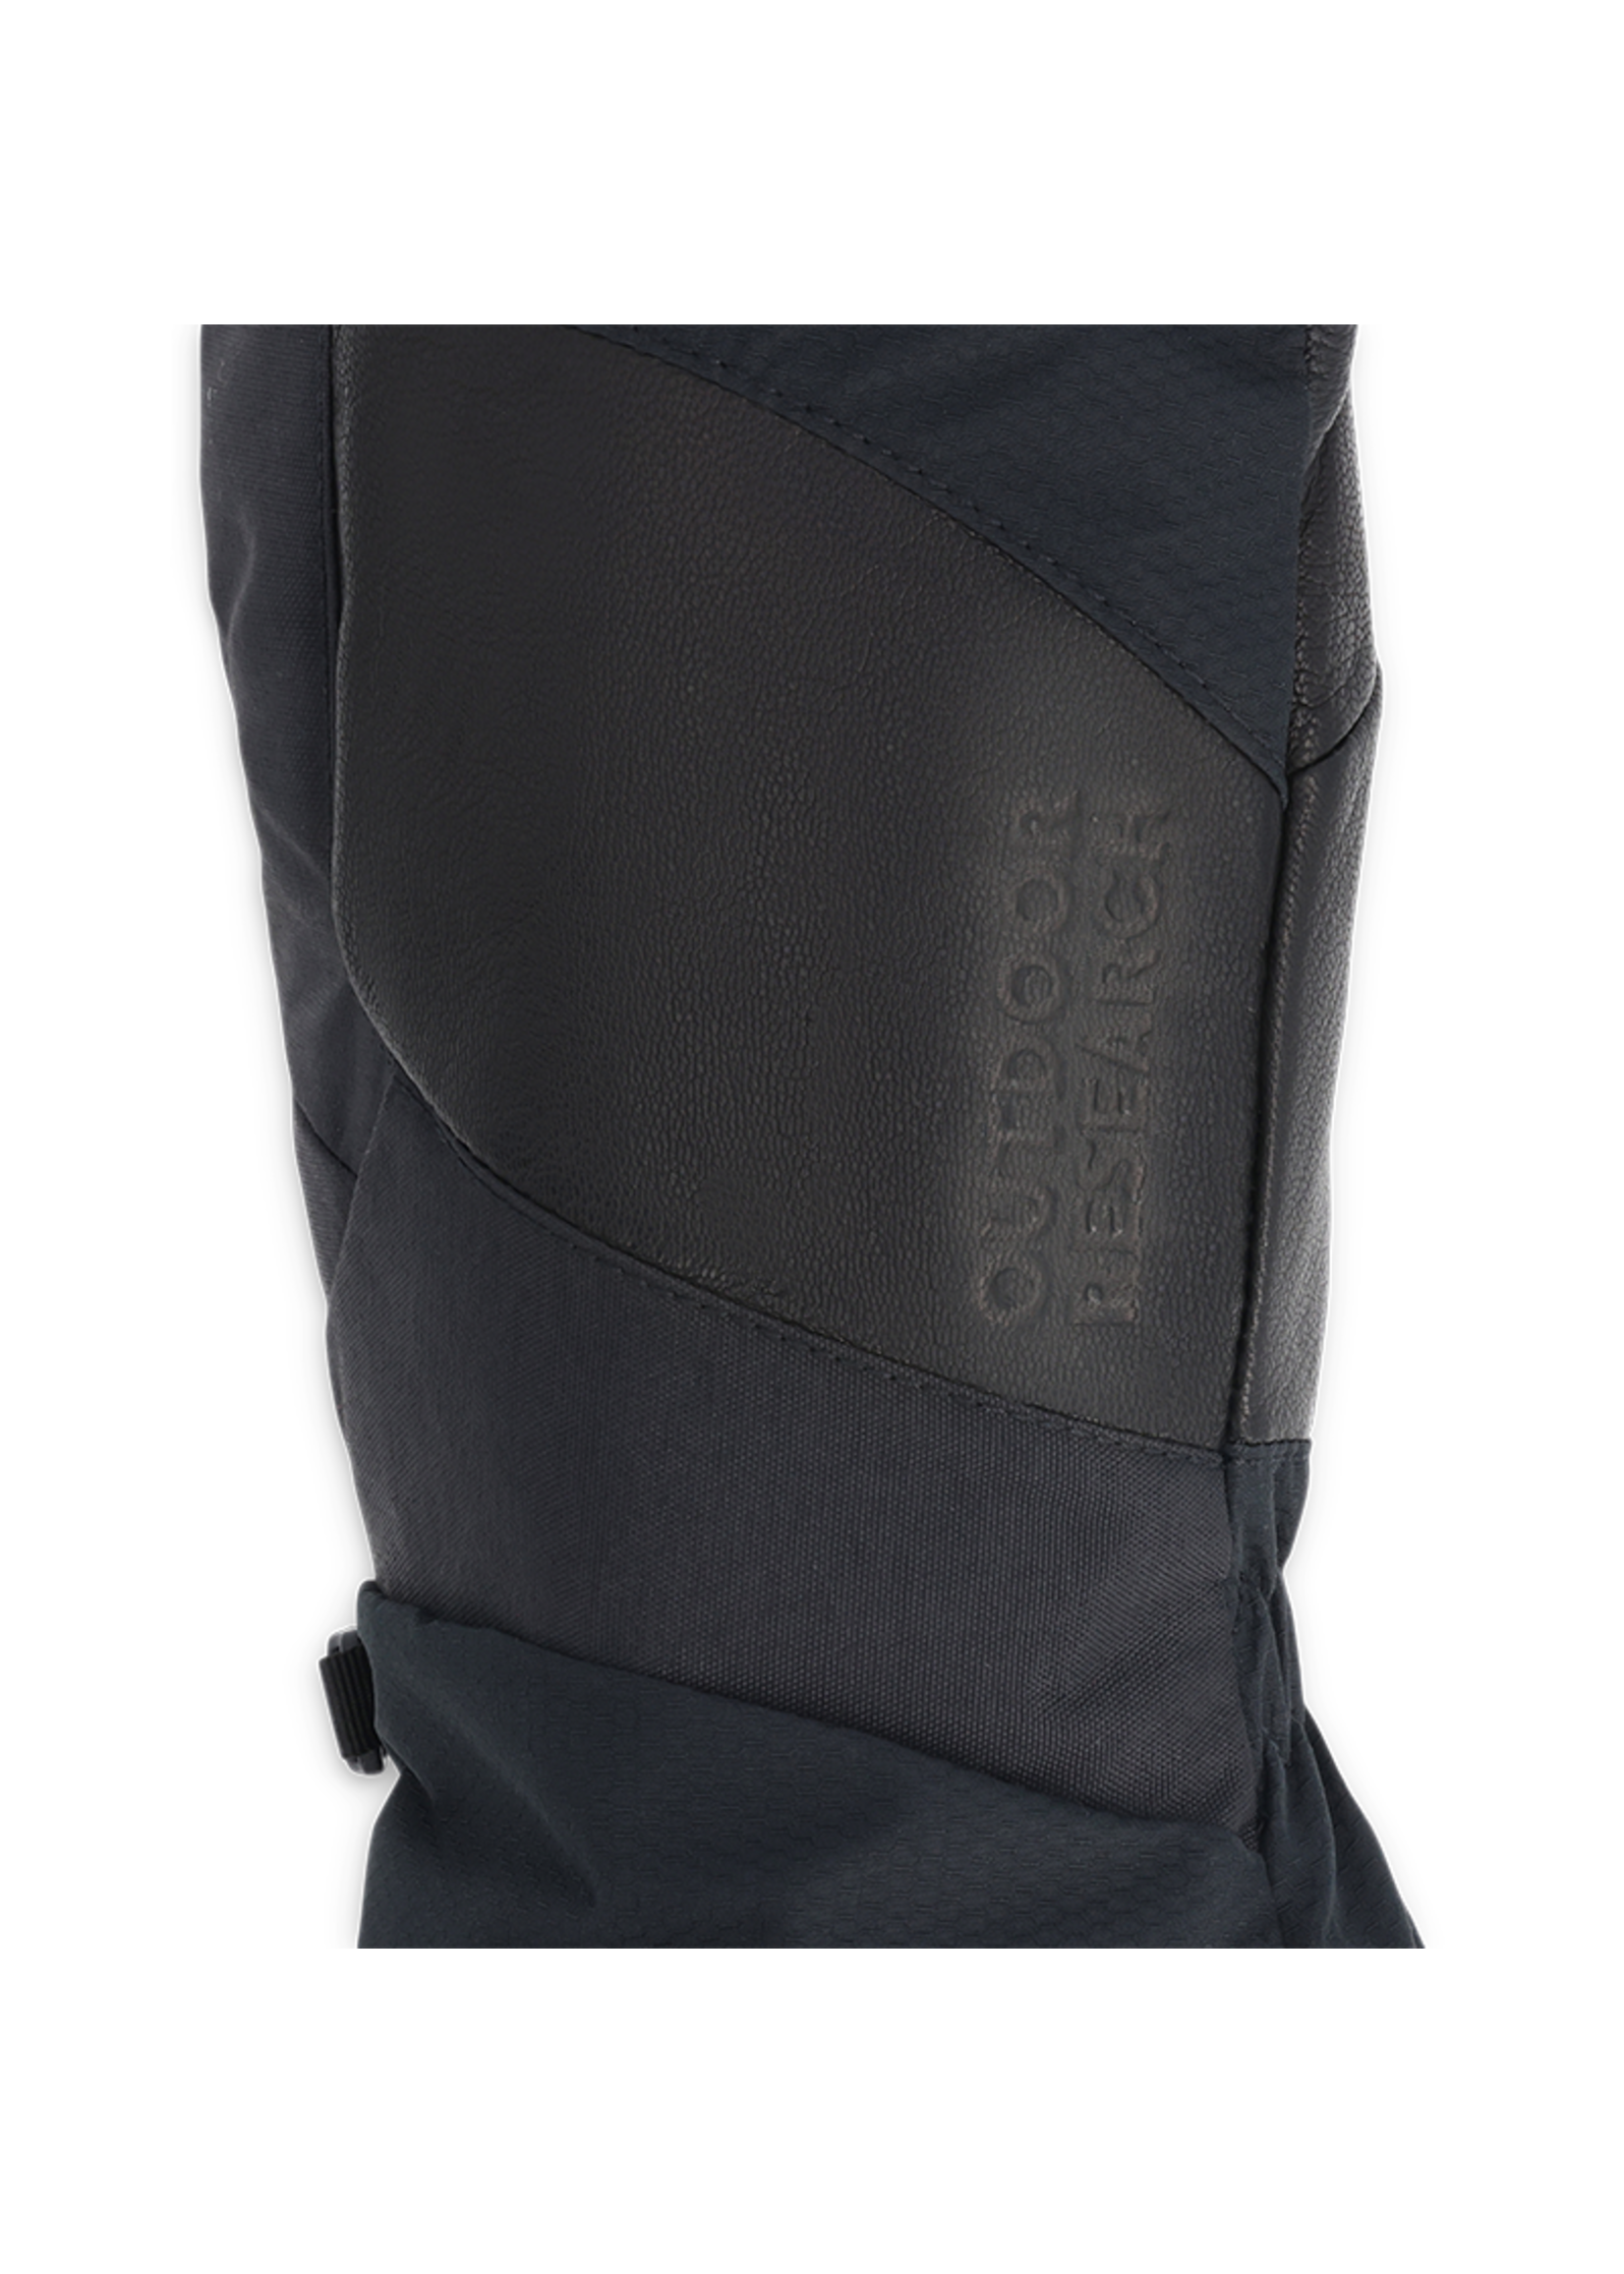 OUTDOOR RESEARCH Prevail Heated GORE-TEX Mitts